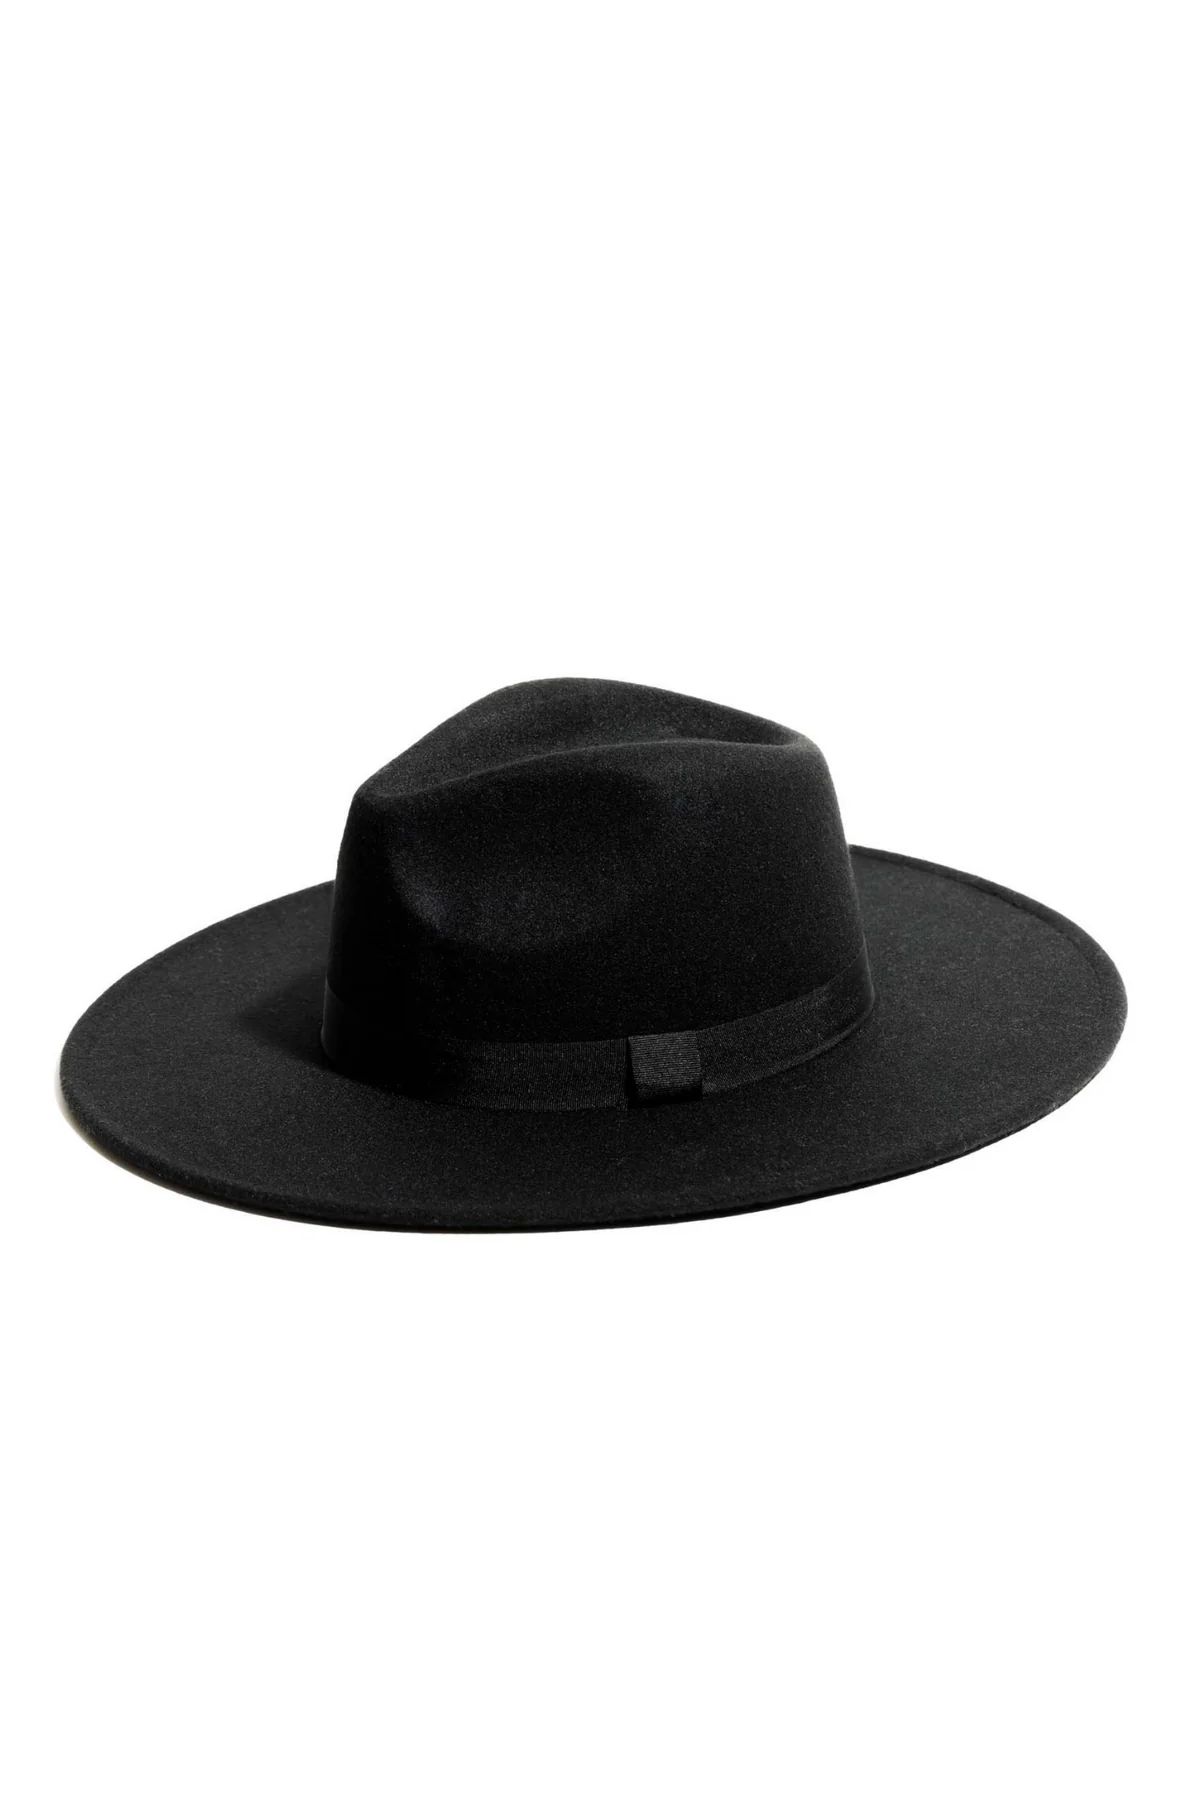 Kell Rancher Hat - Black | THELIFESTYLEDCO